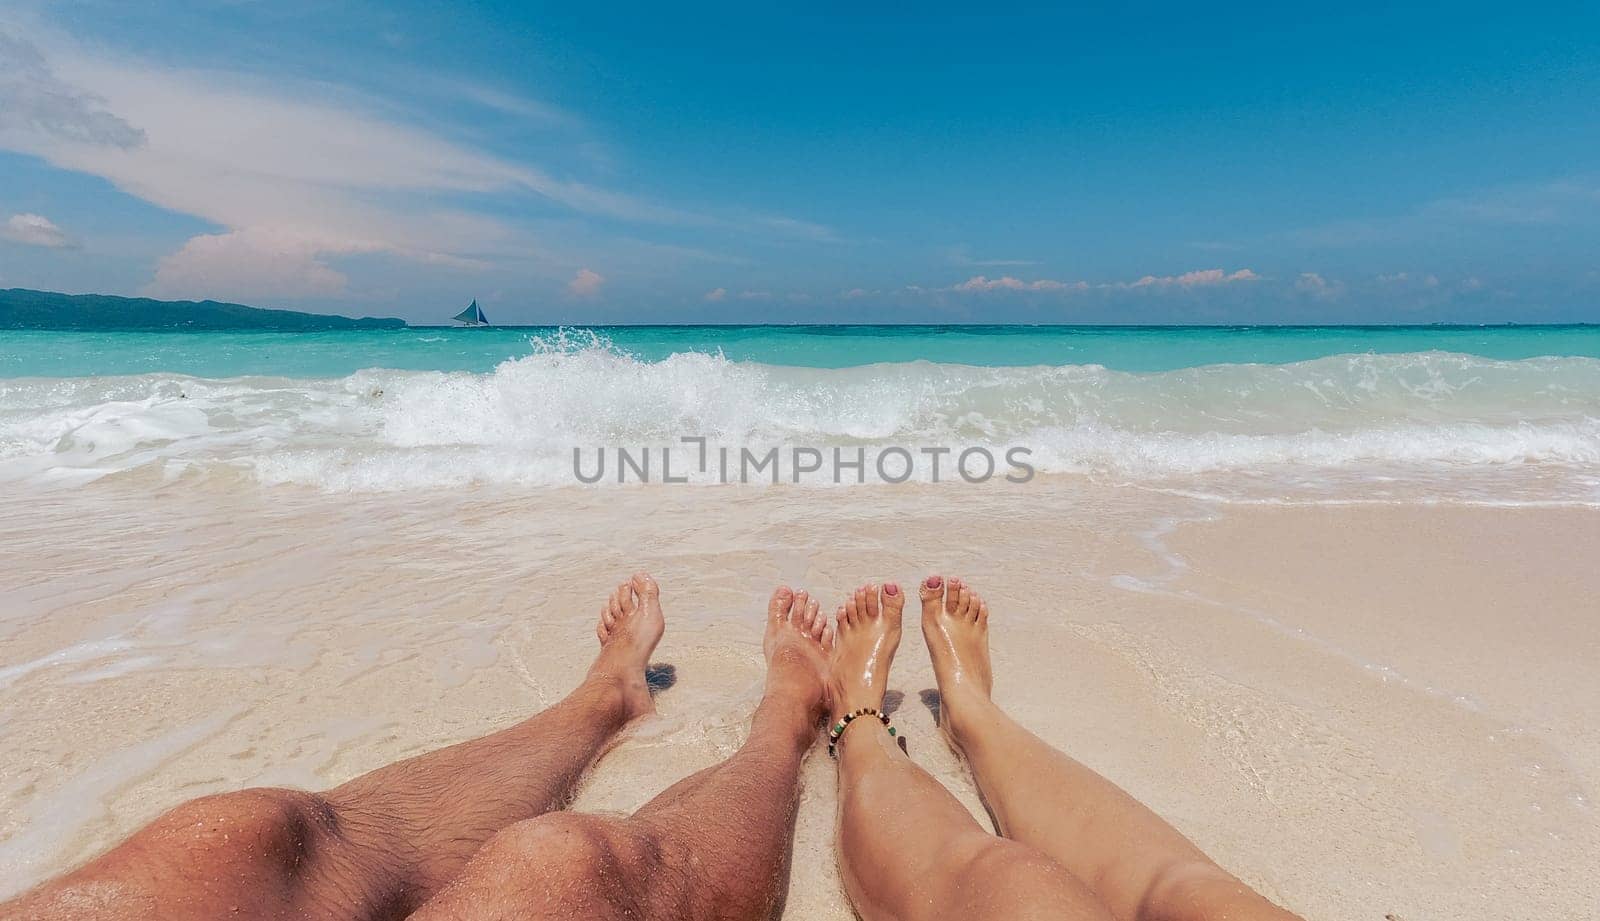 Two people are lying down on the sandy shore of a beautiful beach, enjoying the mid-day sunlight as gentle waves crash nearby. Boracay, Philippines.